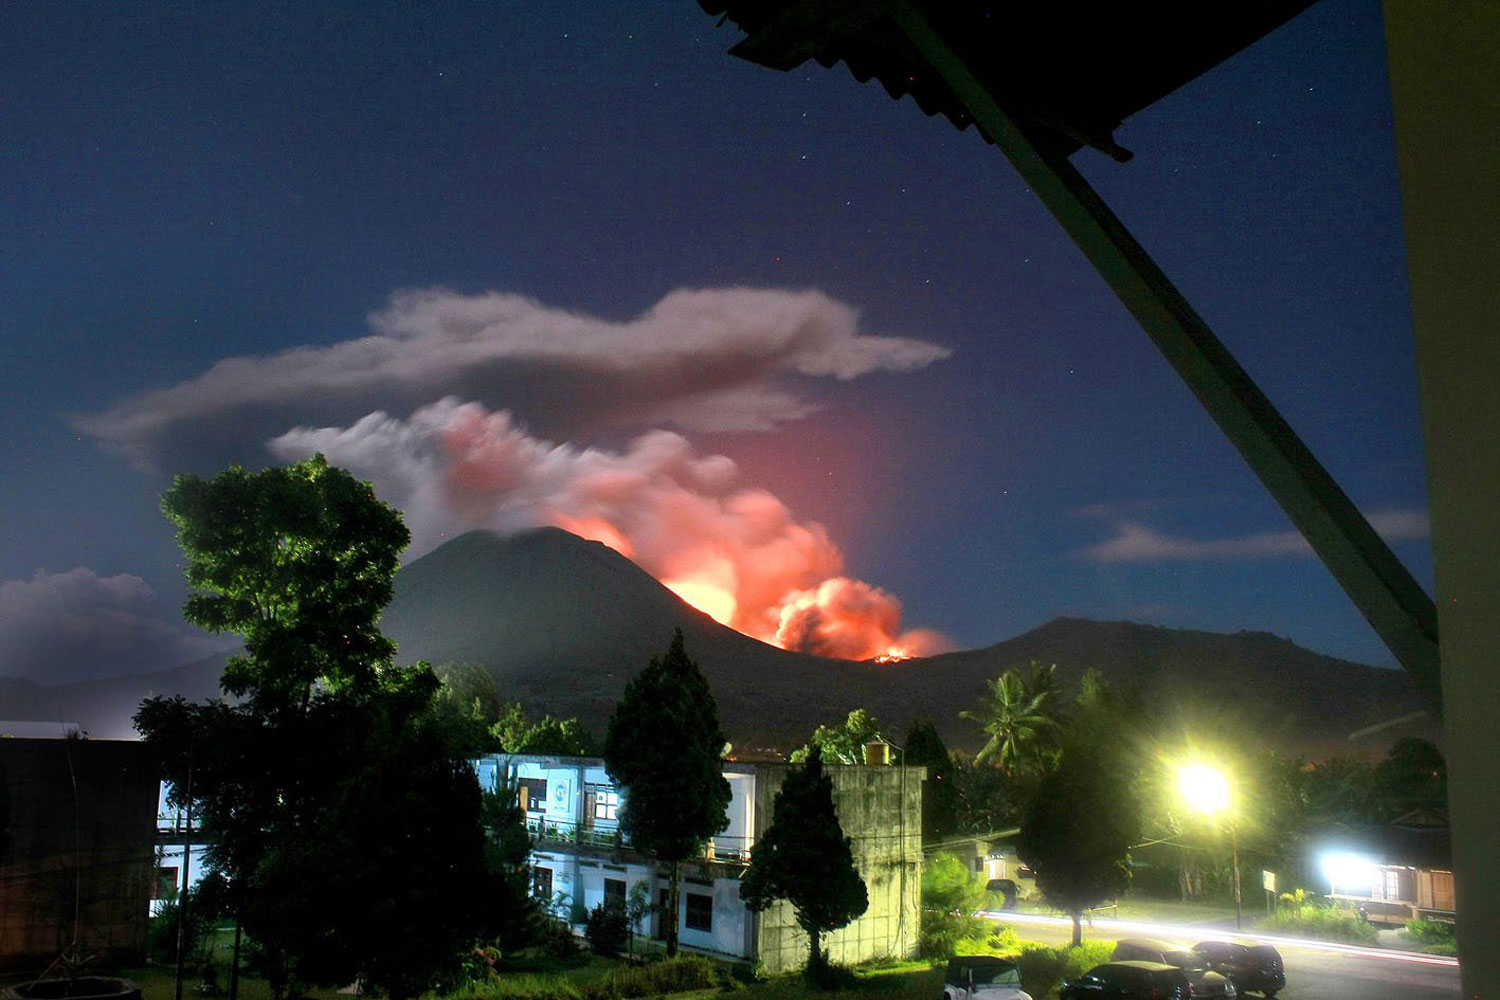 15 July 2011. Mount Lokon erupts as seen from Tomohon, North Sulawesi, Indonesia. Indonesian authorities raised the alert at the volcano on Sulawesi island to the highest level and urged the evacuation of the danger zone. More than 30,000 people live near the volcano, according to the local government.